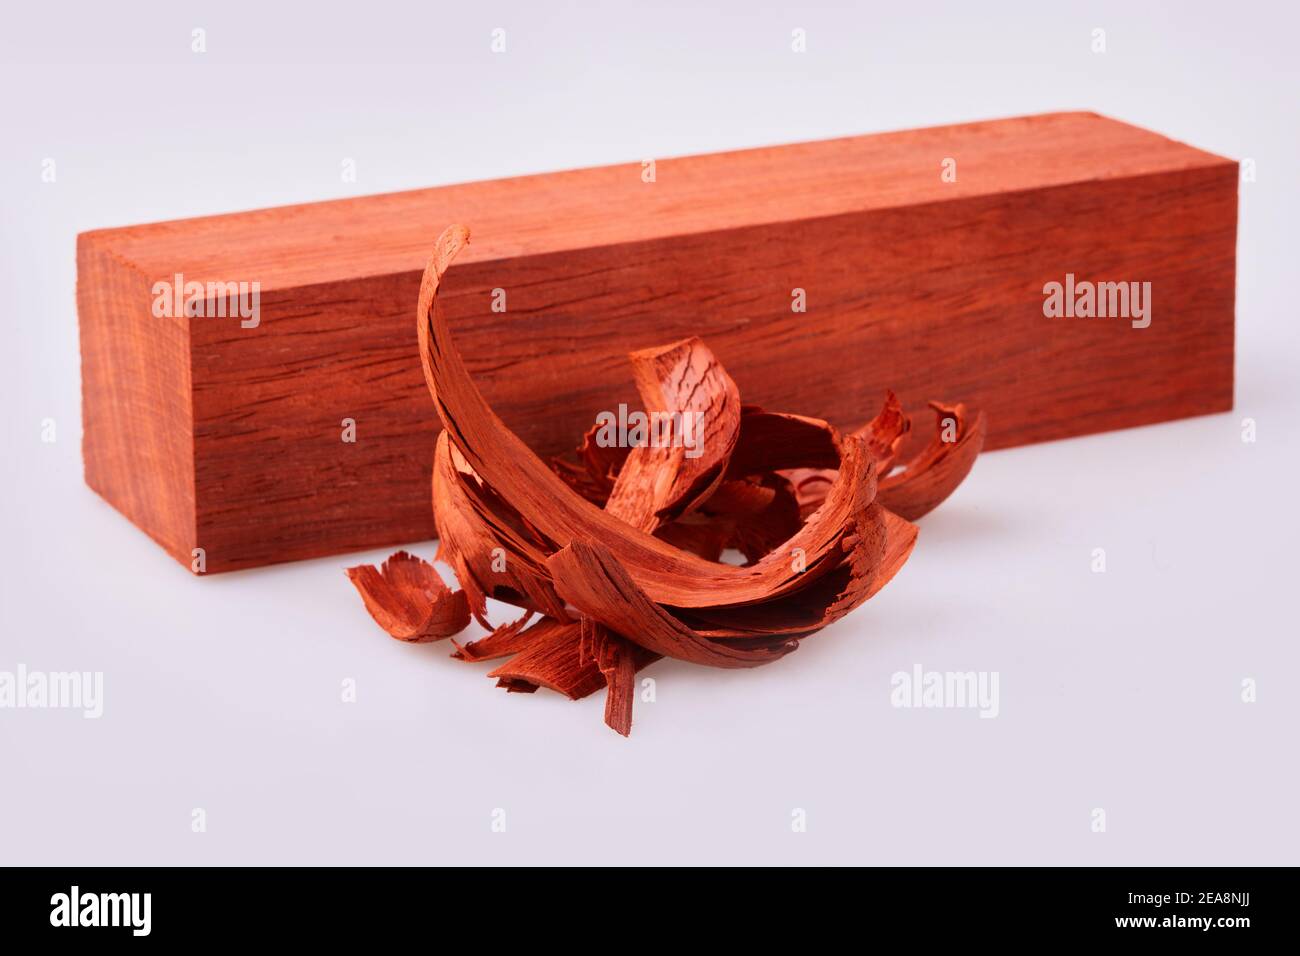 Colored wooden blocks with shavings isolated on white background. It is used for handmade wooden sculpturing Stock Photo